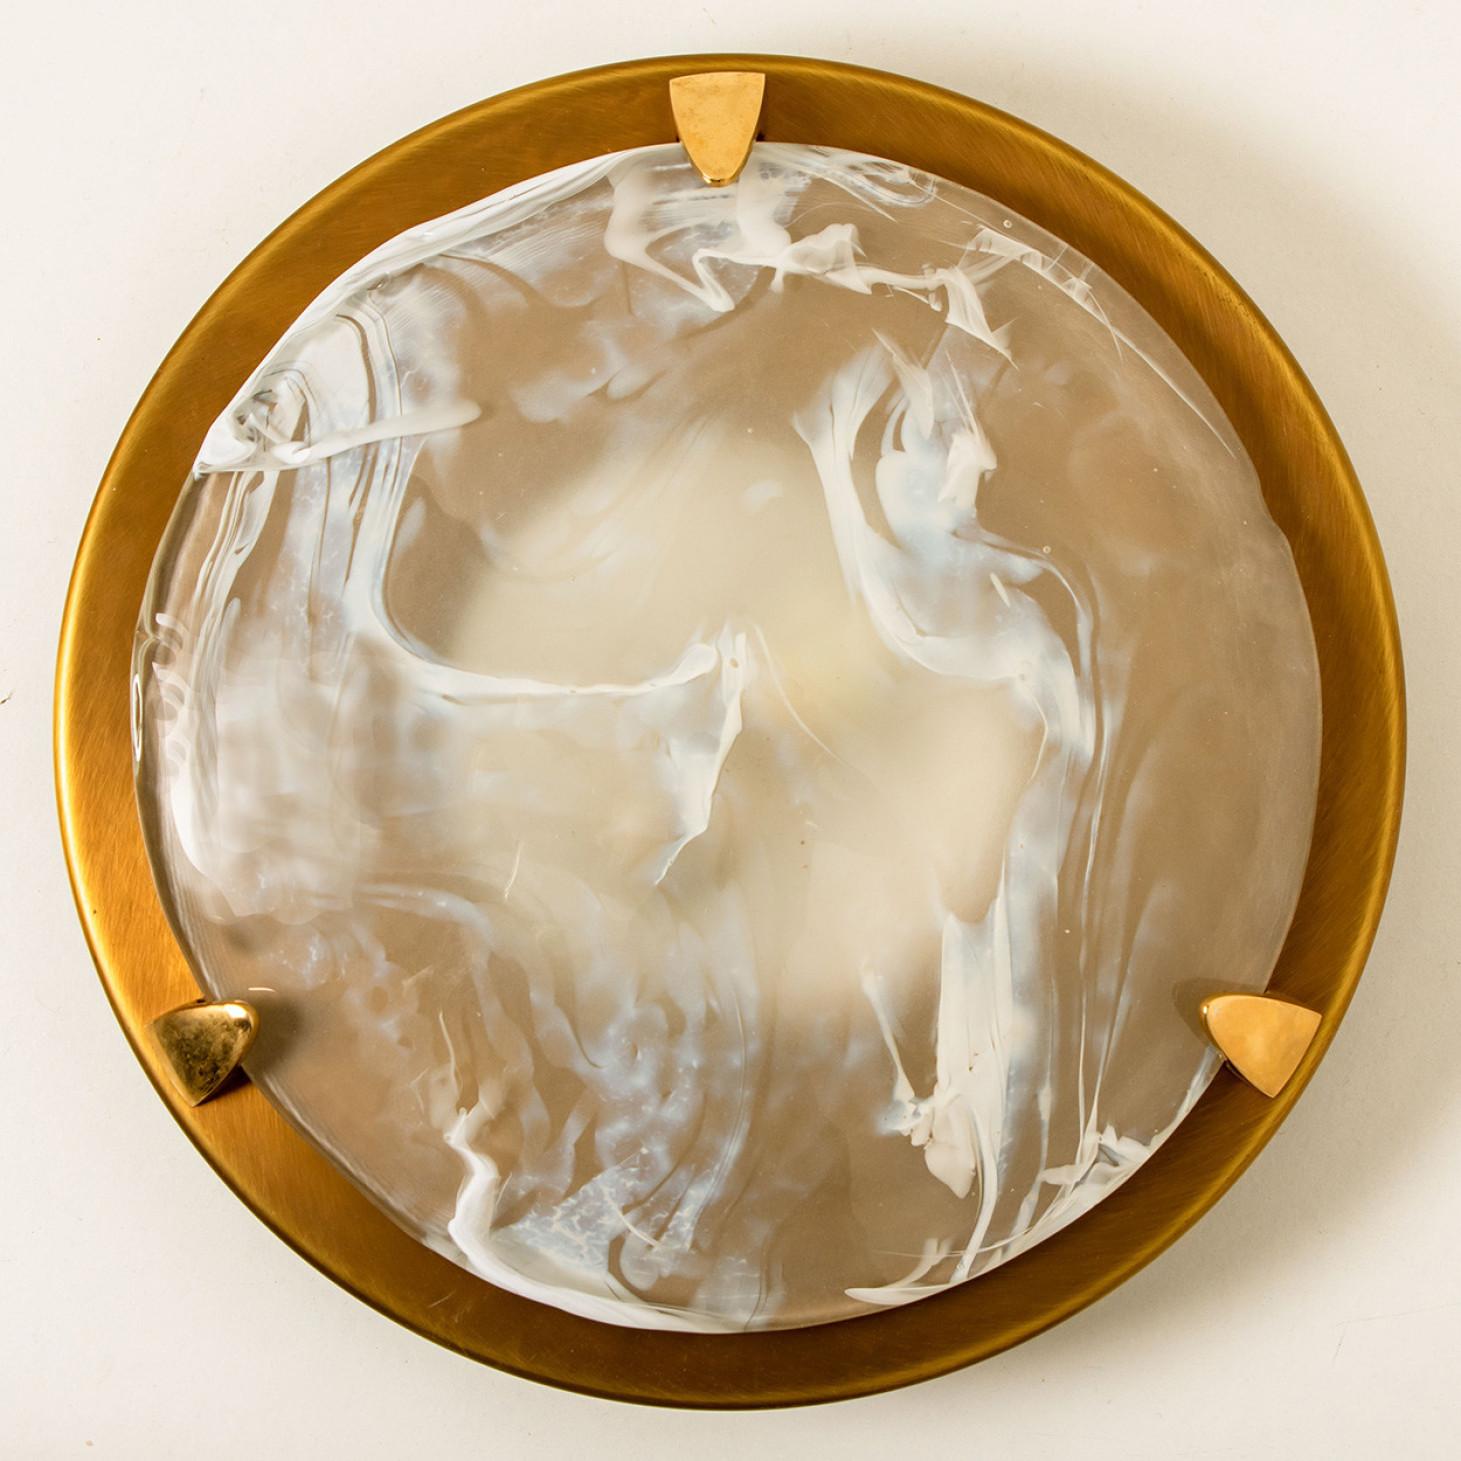 A  stunning high-end brass and Murano glass flushmount manufactured in the late 1960s-early 1970s. The brass ring holds a large heavy blown glass with four brass brackets. The think glass has a beautiful textured structure. With stripes of clear and